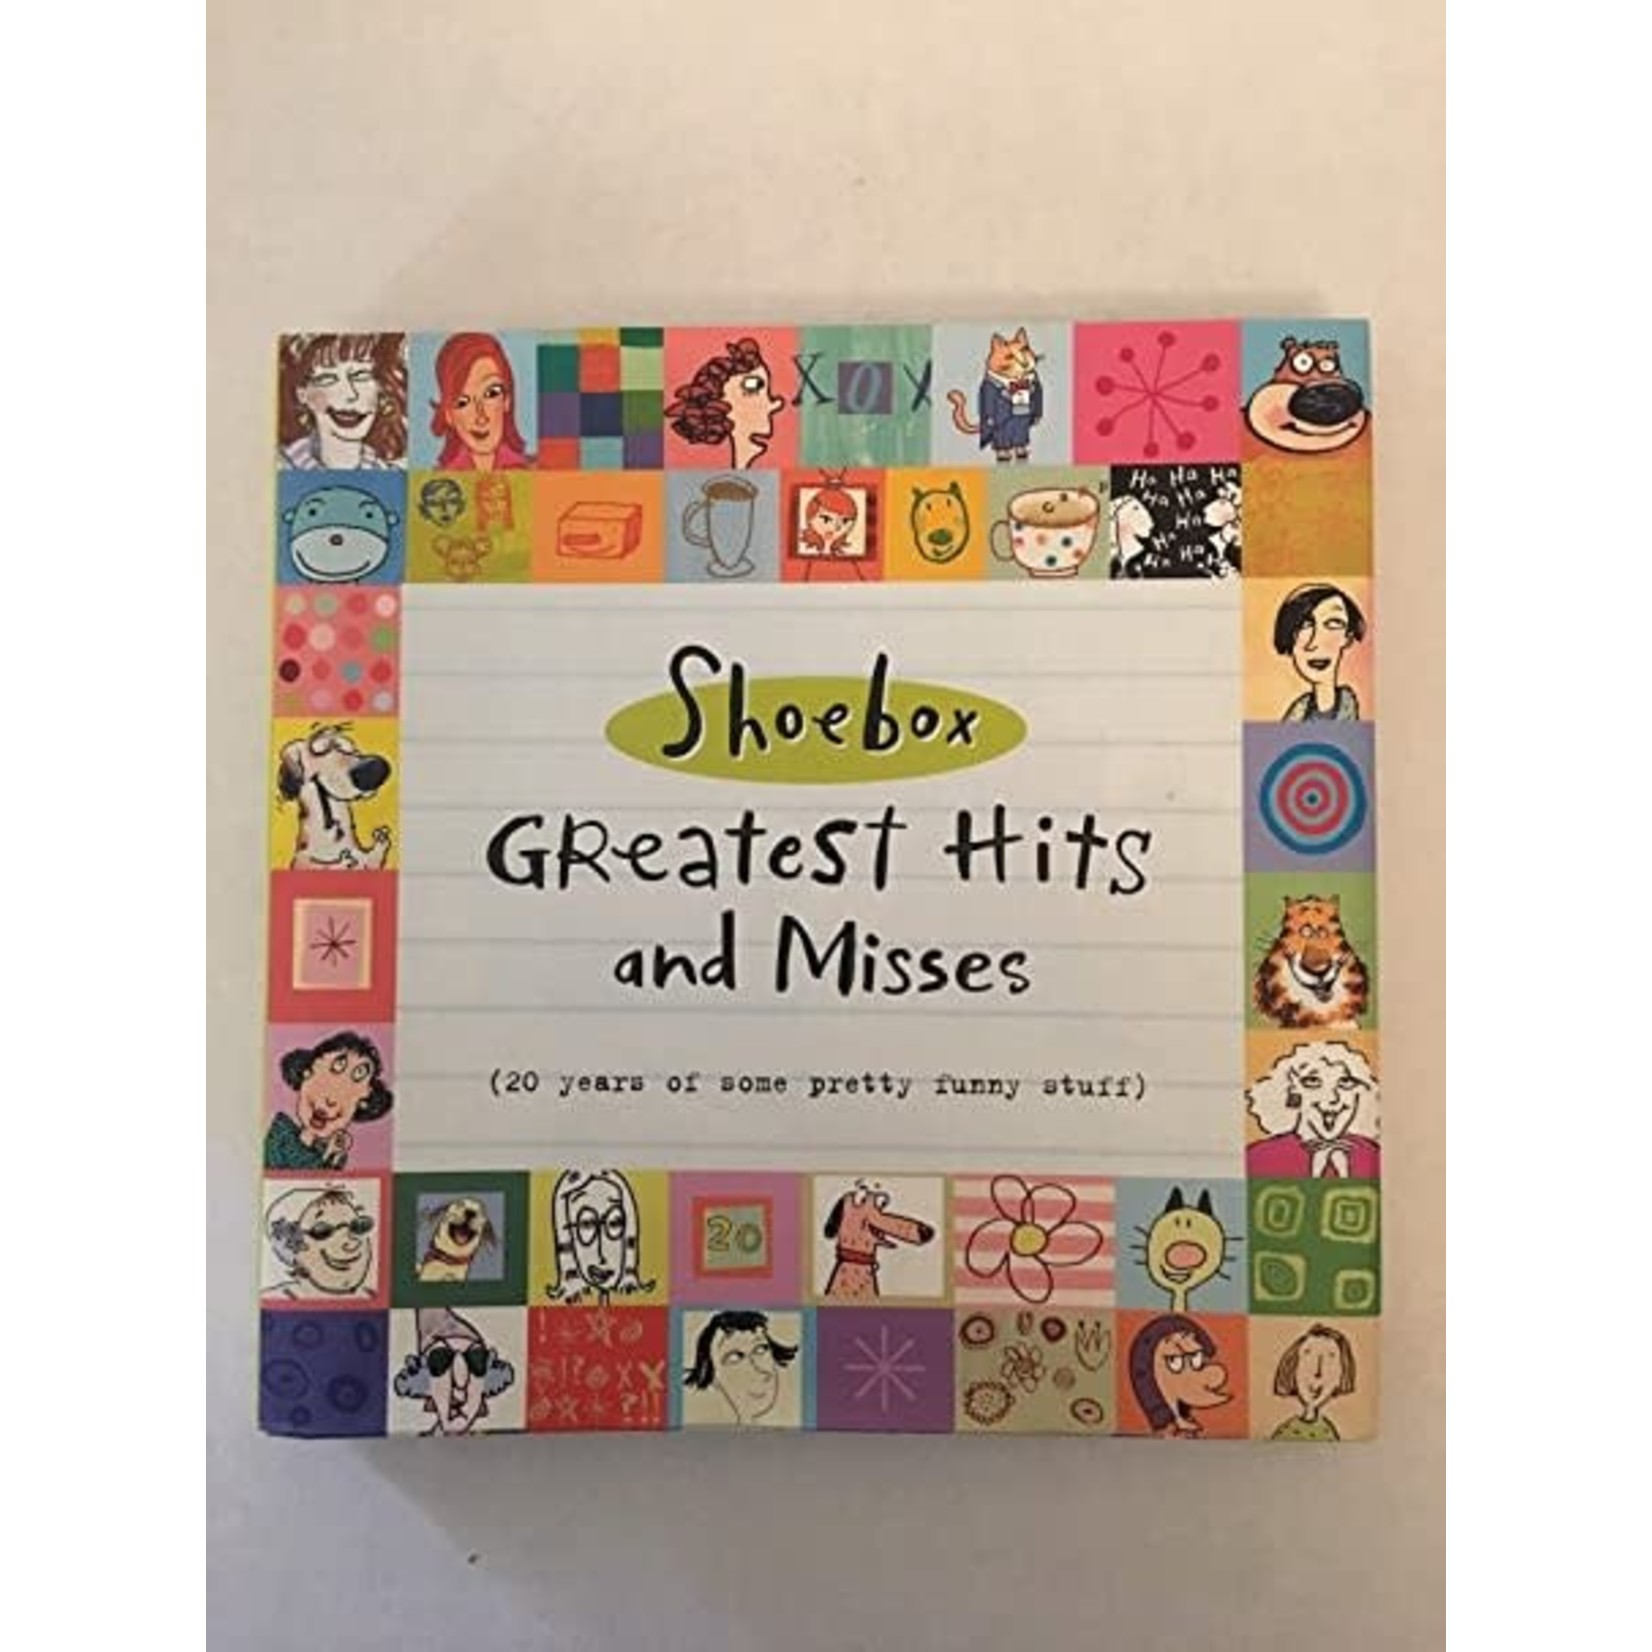 Shoebox Greatest Hits and Misses (20 Years of some pretty funny stuff)